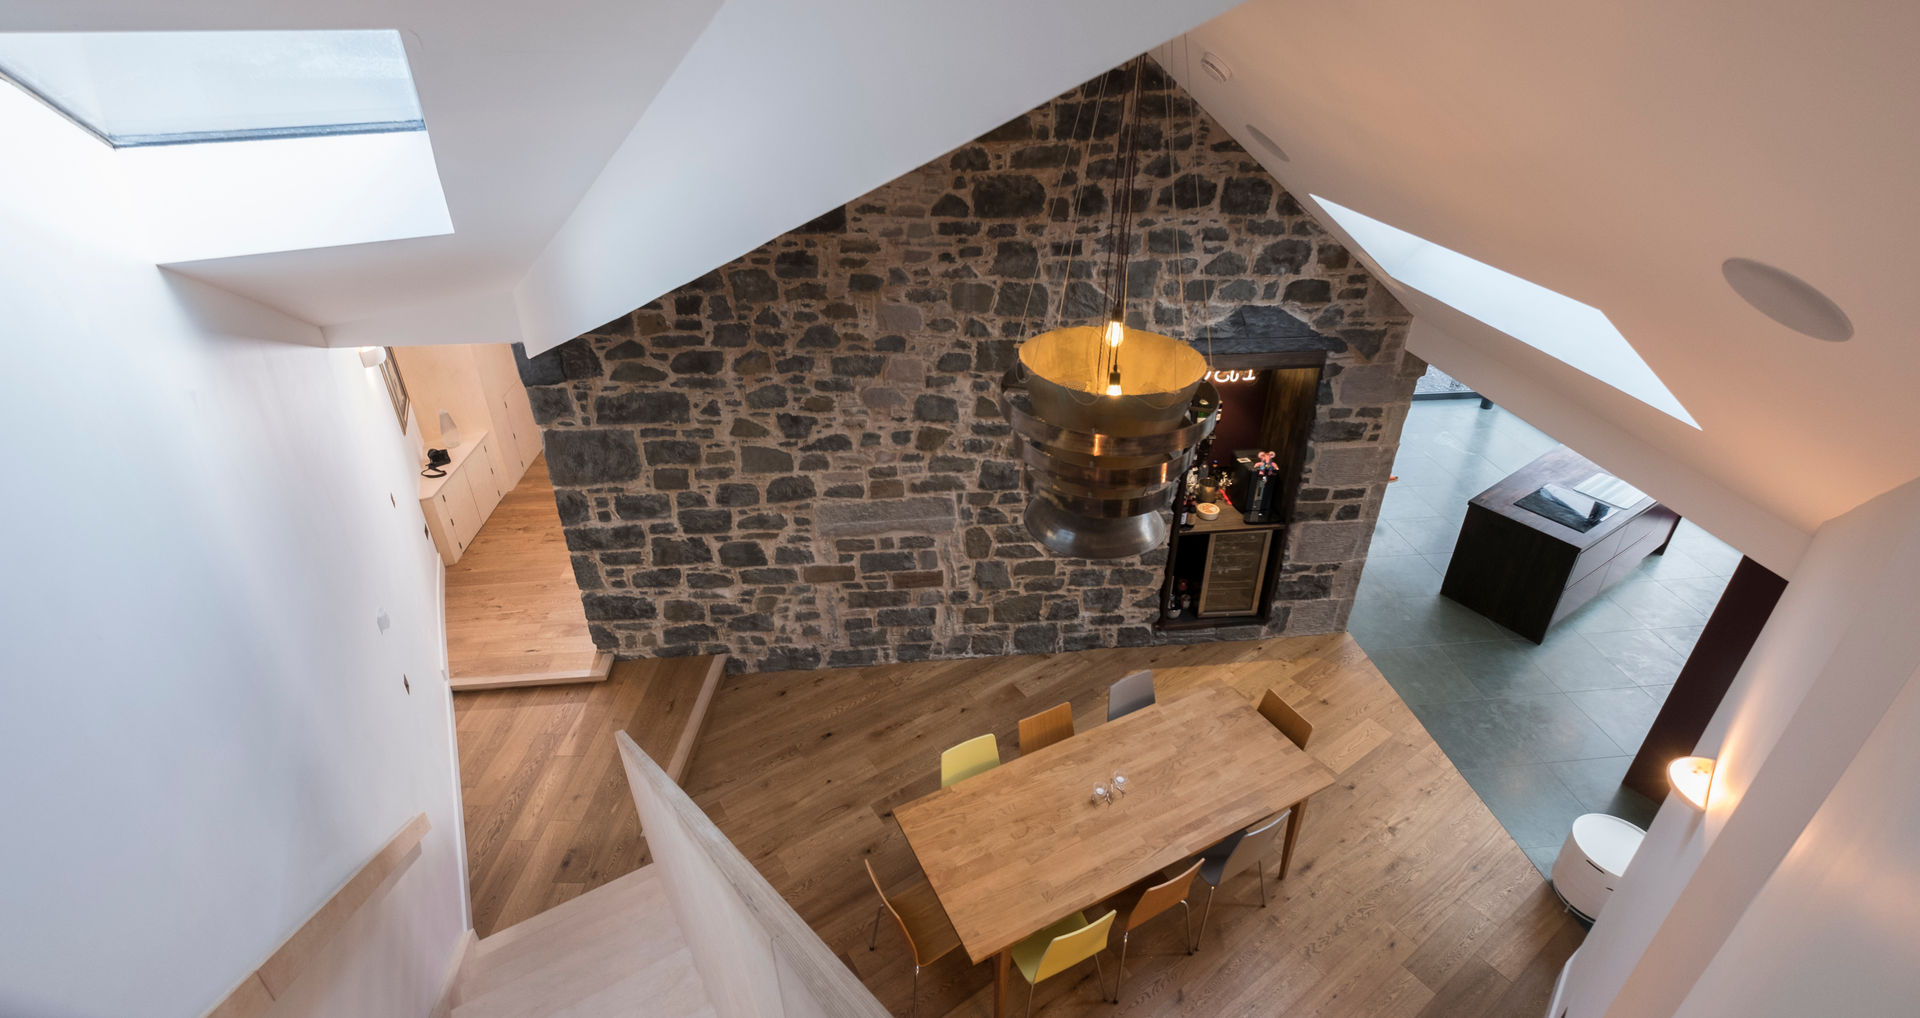 View from staircase over the dining room Woodside Parker Kirk Architects Comedores de estilo moderno Piedra Rooflight,Bespoke,Staircase,Plywood,Reclaimed,Lighting,Dining room,Stone wall,Original features,wood flooring